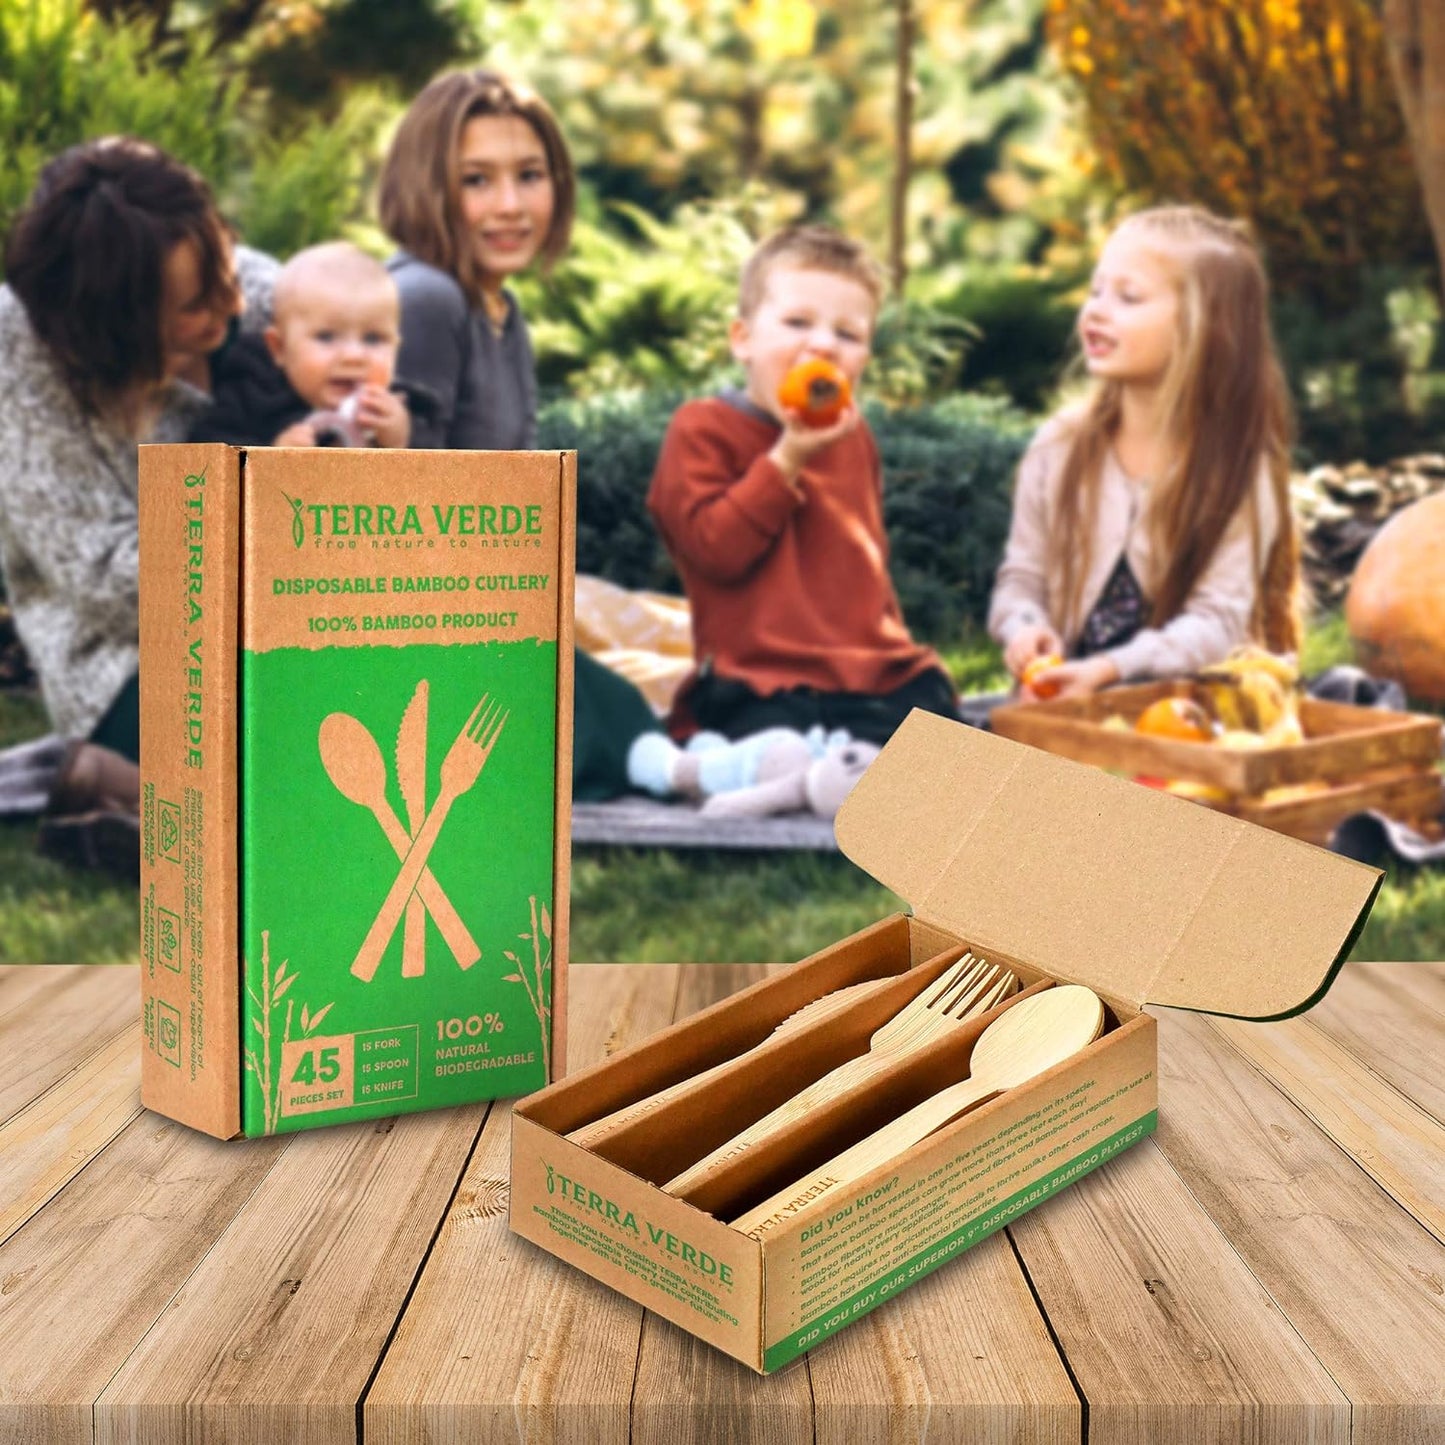 Disposable Cutlery Bamboo not Birchwood l Eco Friendly Biodegradable Compostable l Set of 45 Pcs (15 Forks 15 Spoons 15 Knives